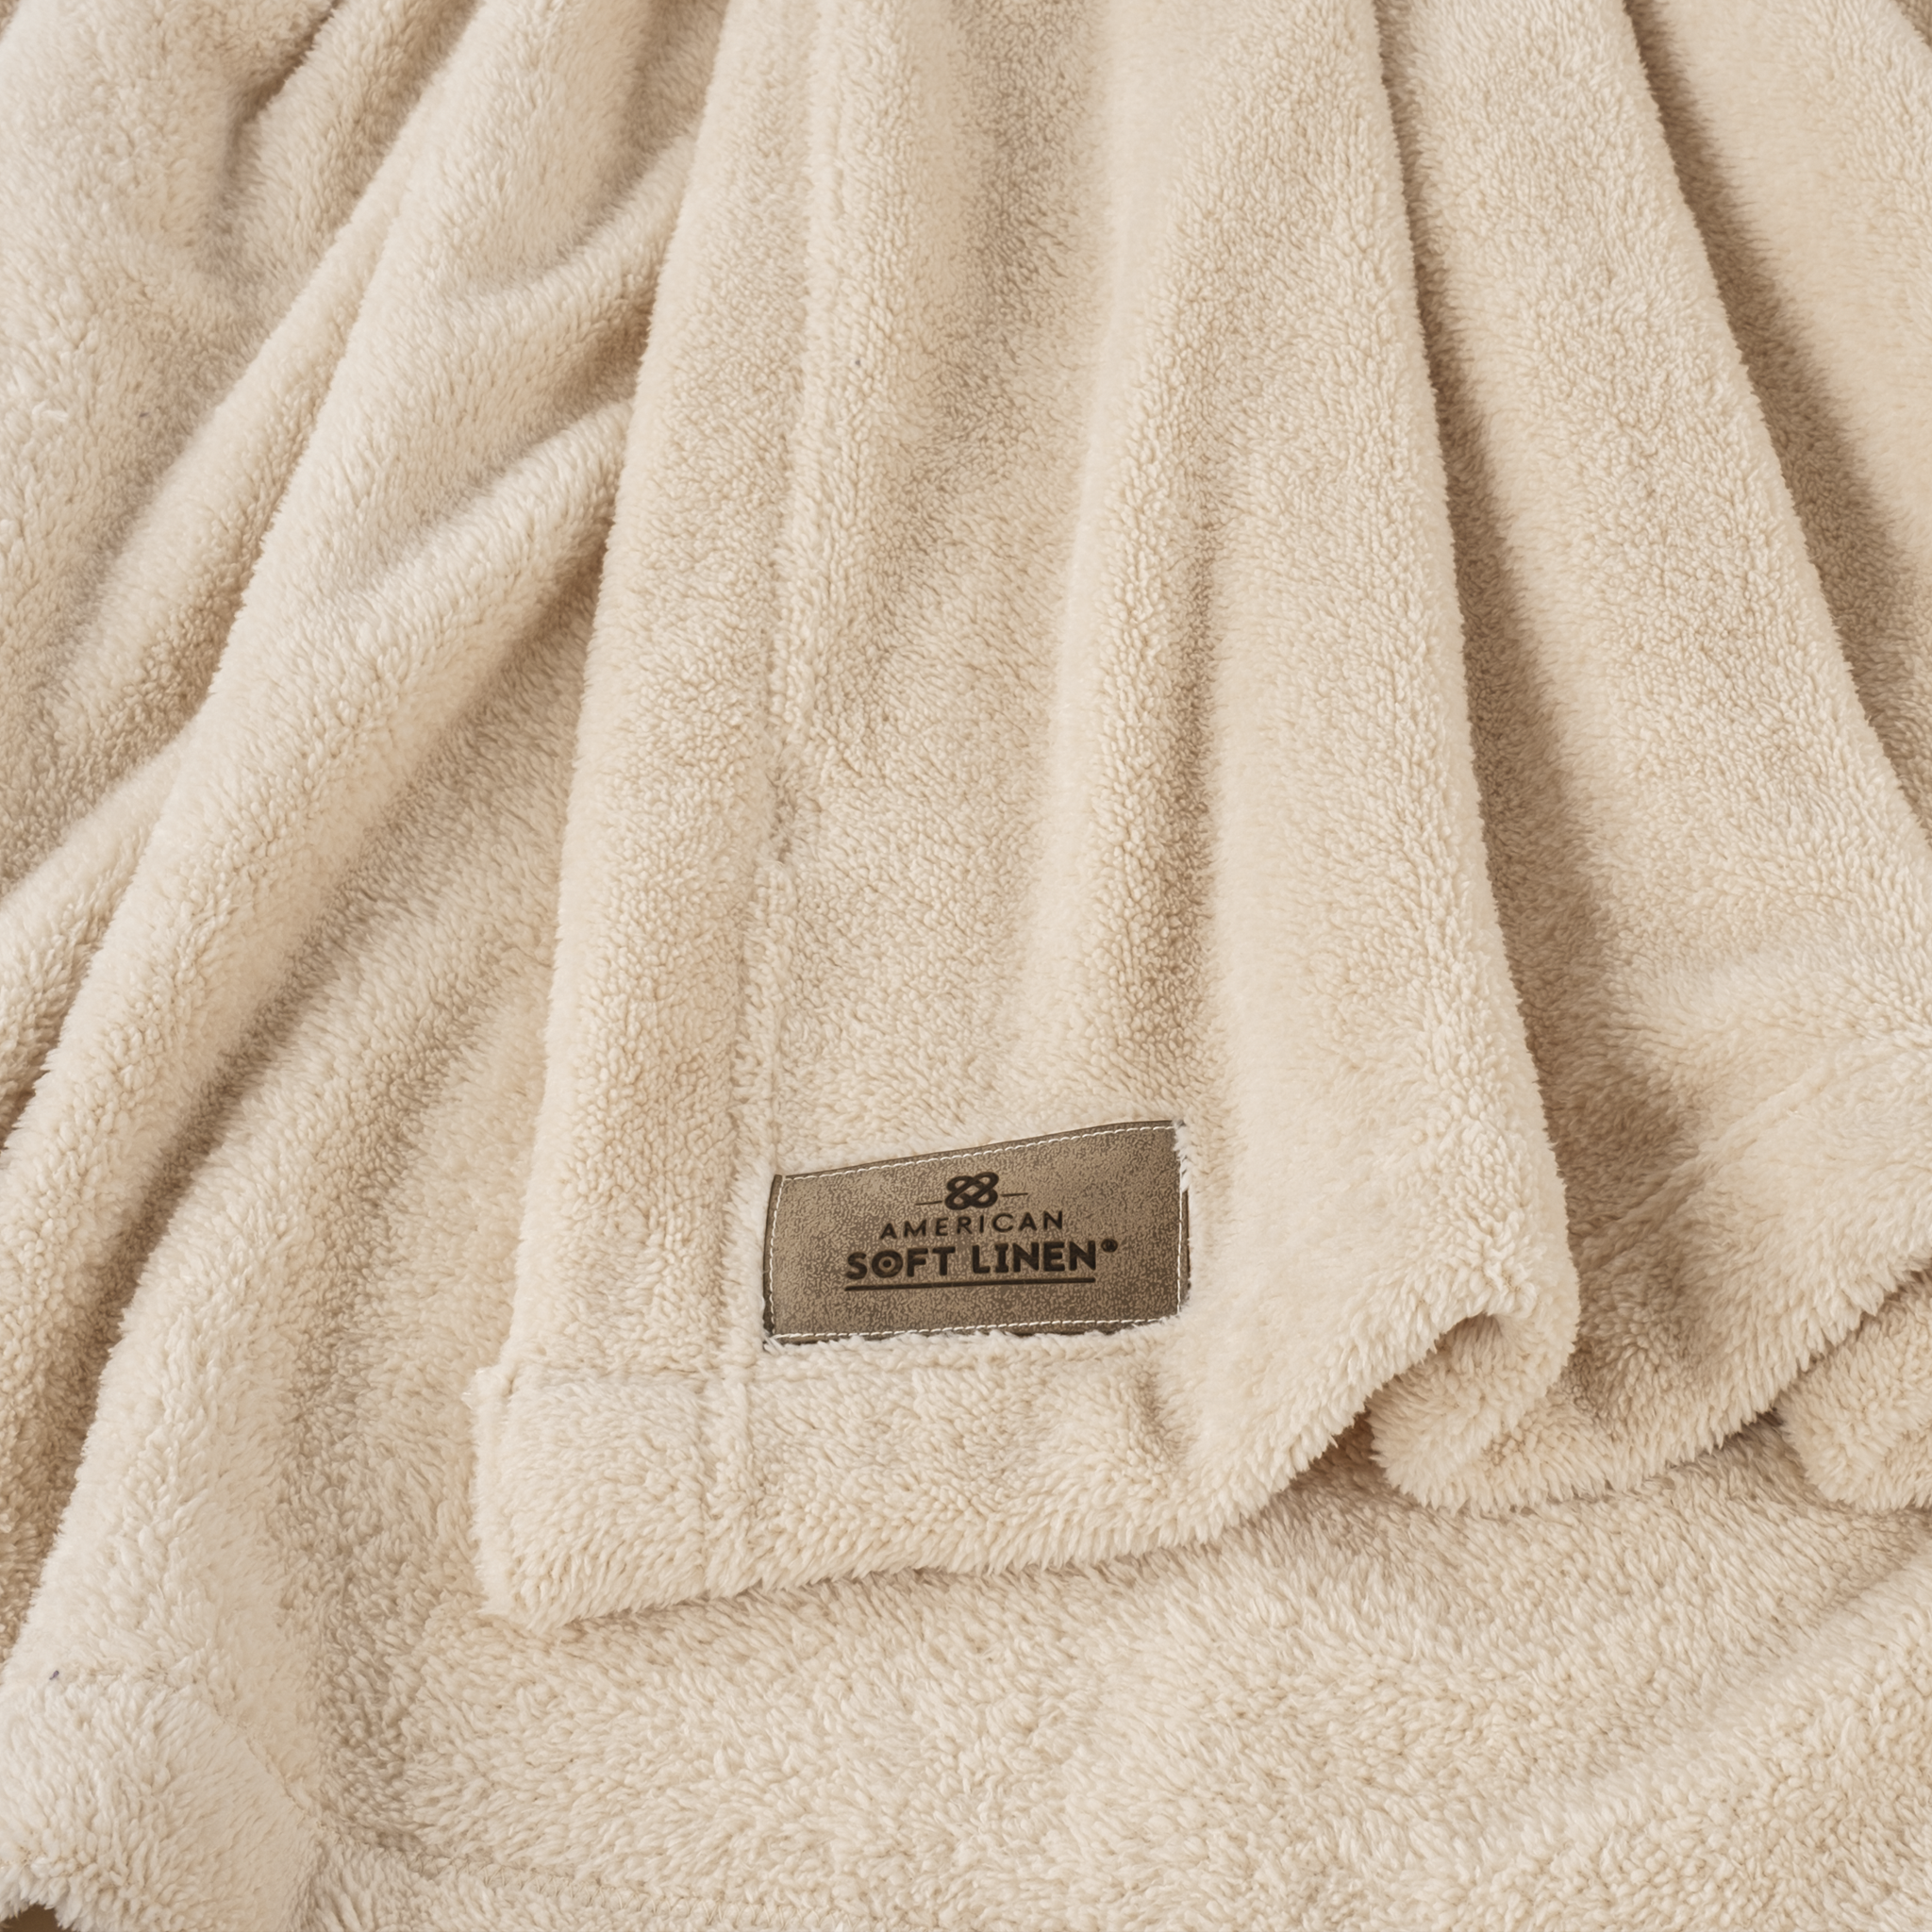 American Soft Linen - Bedding Fleece Blanket - Throw Size 50x60 inches - Sand-Taupe - 4